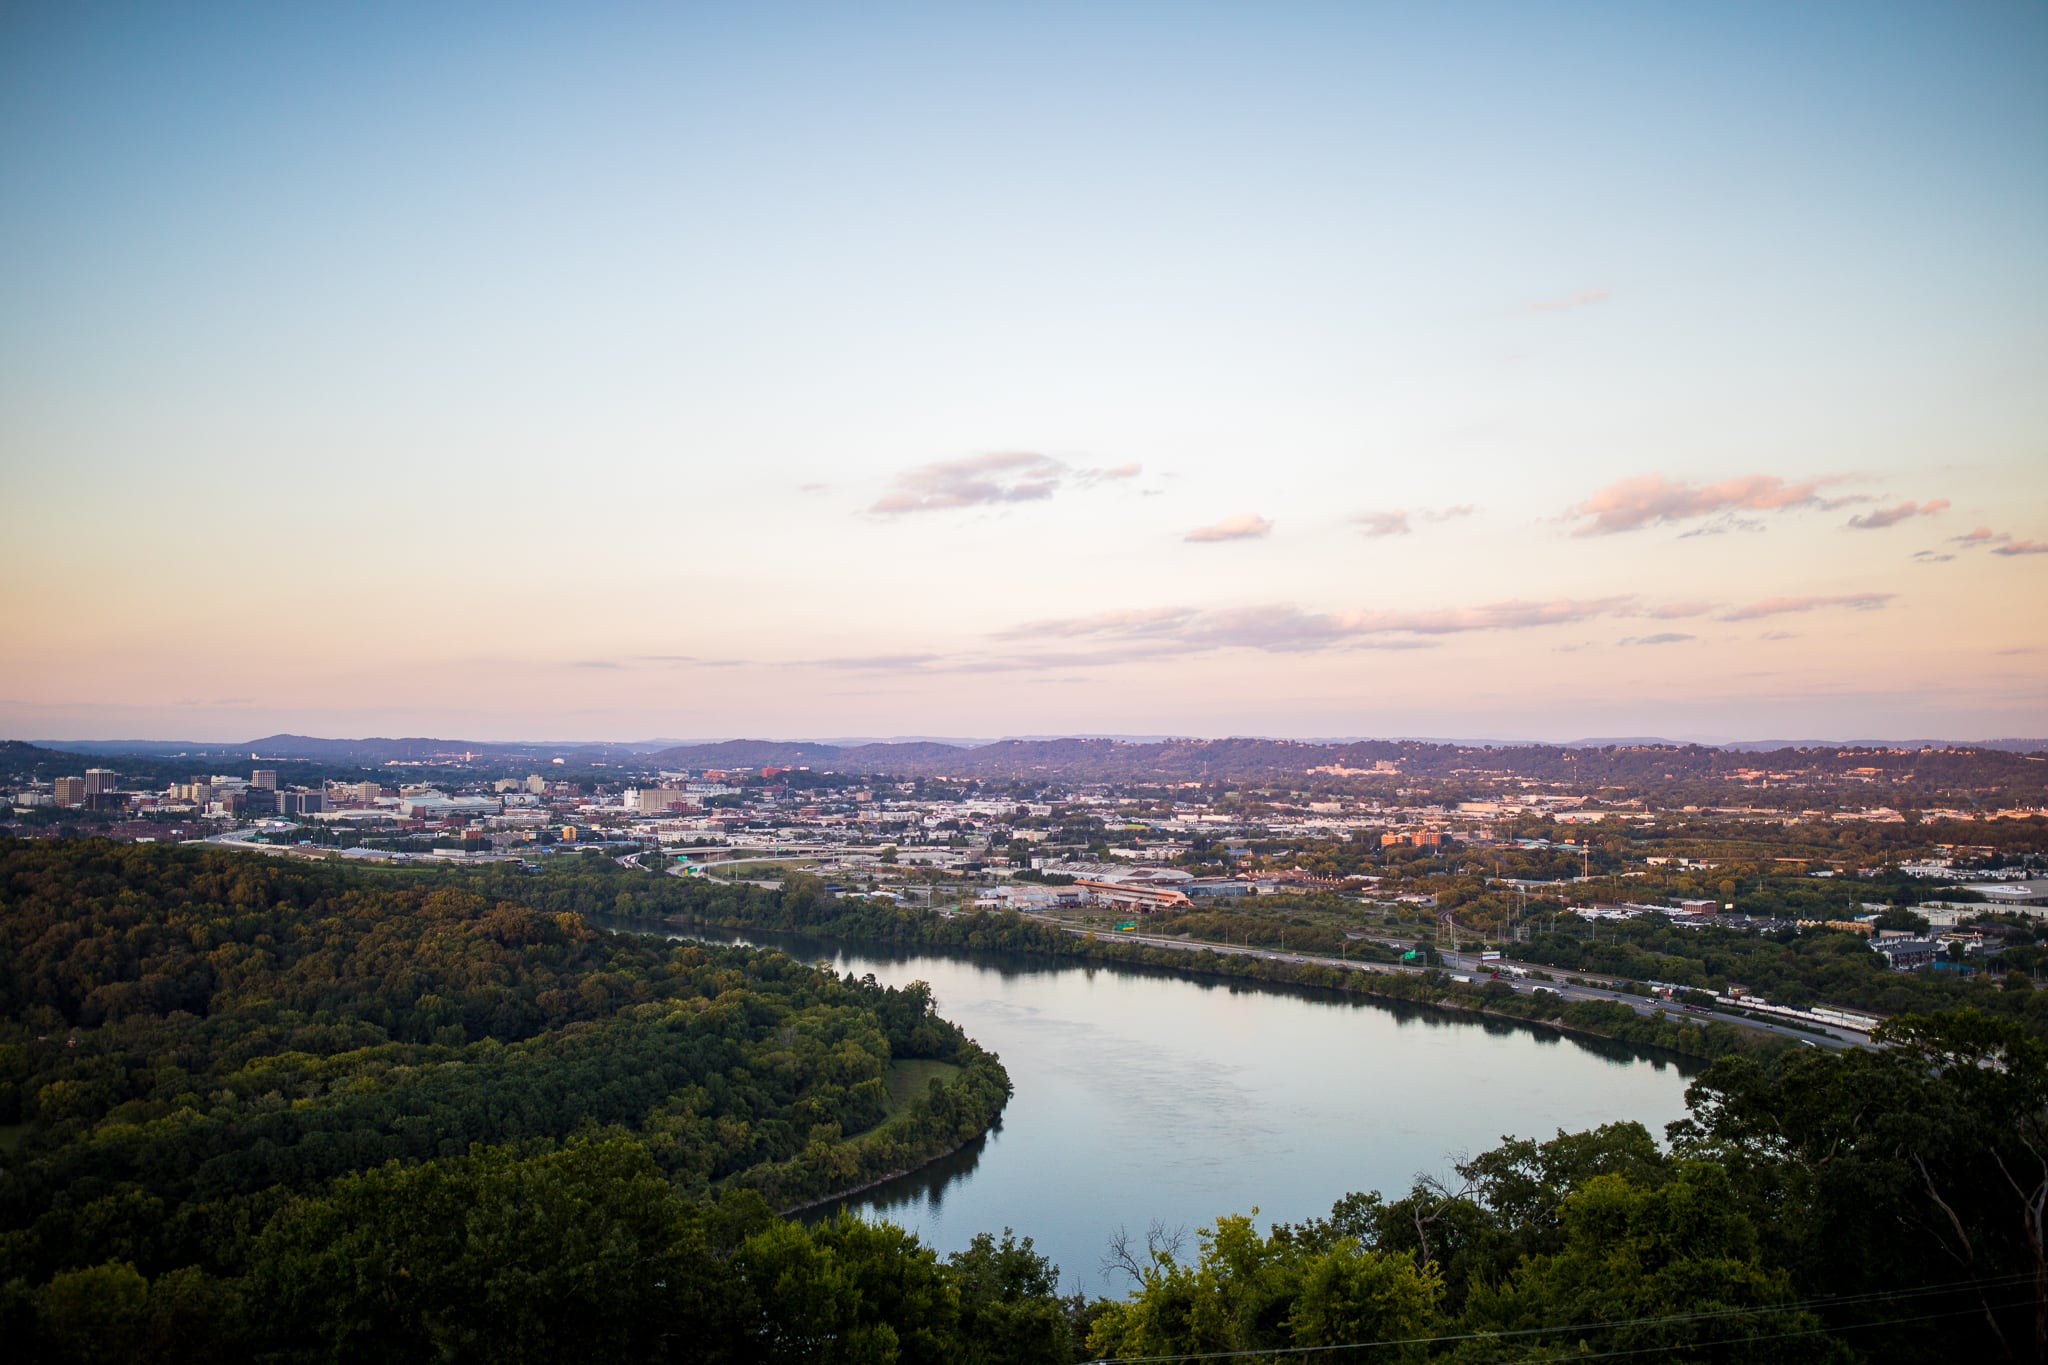 A view from above showing the city of Chattanooga and the Tennessee River